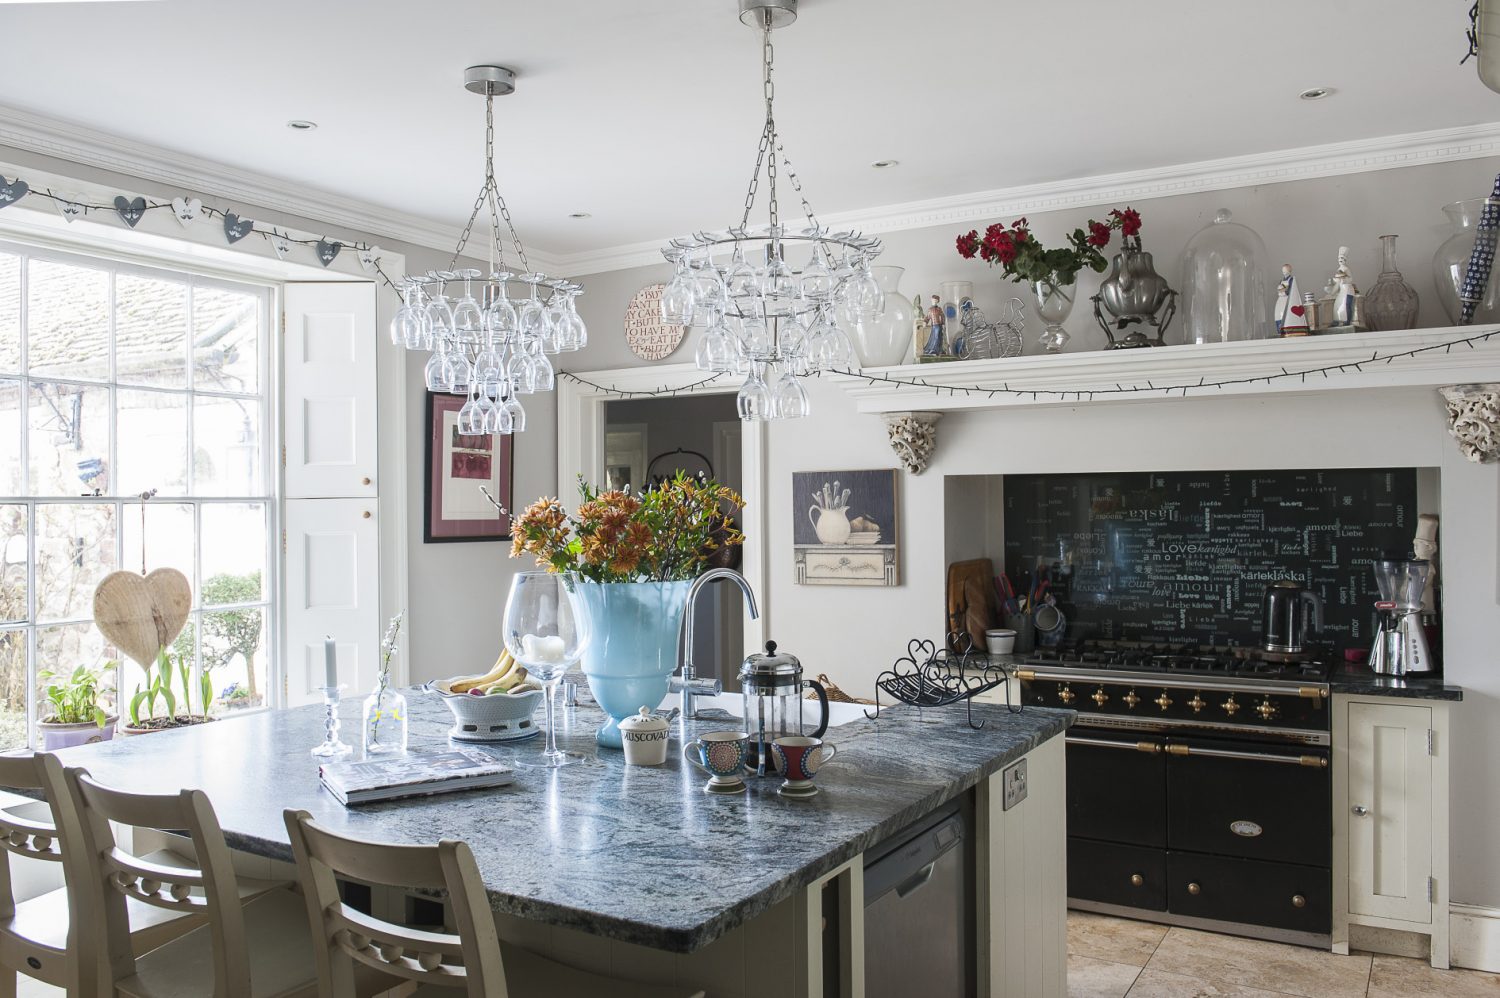 Christel loves to cook, but also lets professional chefs use her kitchen when hosting weddings. The impressive mantelpiece was made especially to sit over the Lacanche range cooker – which came from one of David Beckham’s houses – and the stone corbels on which it rests, came from an antiques fair